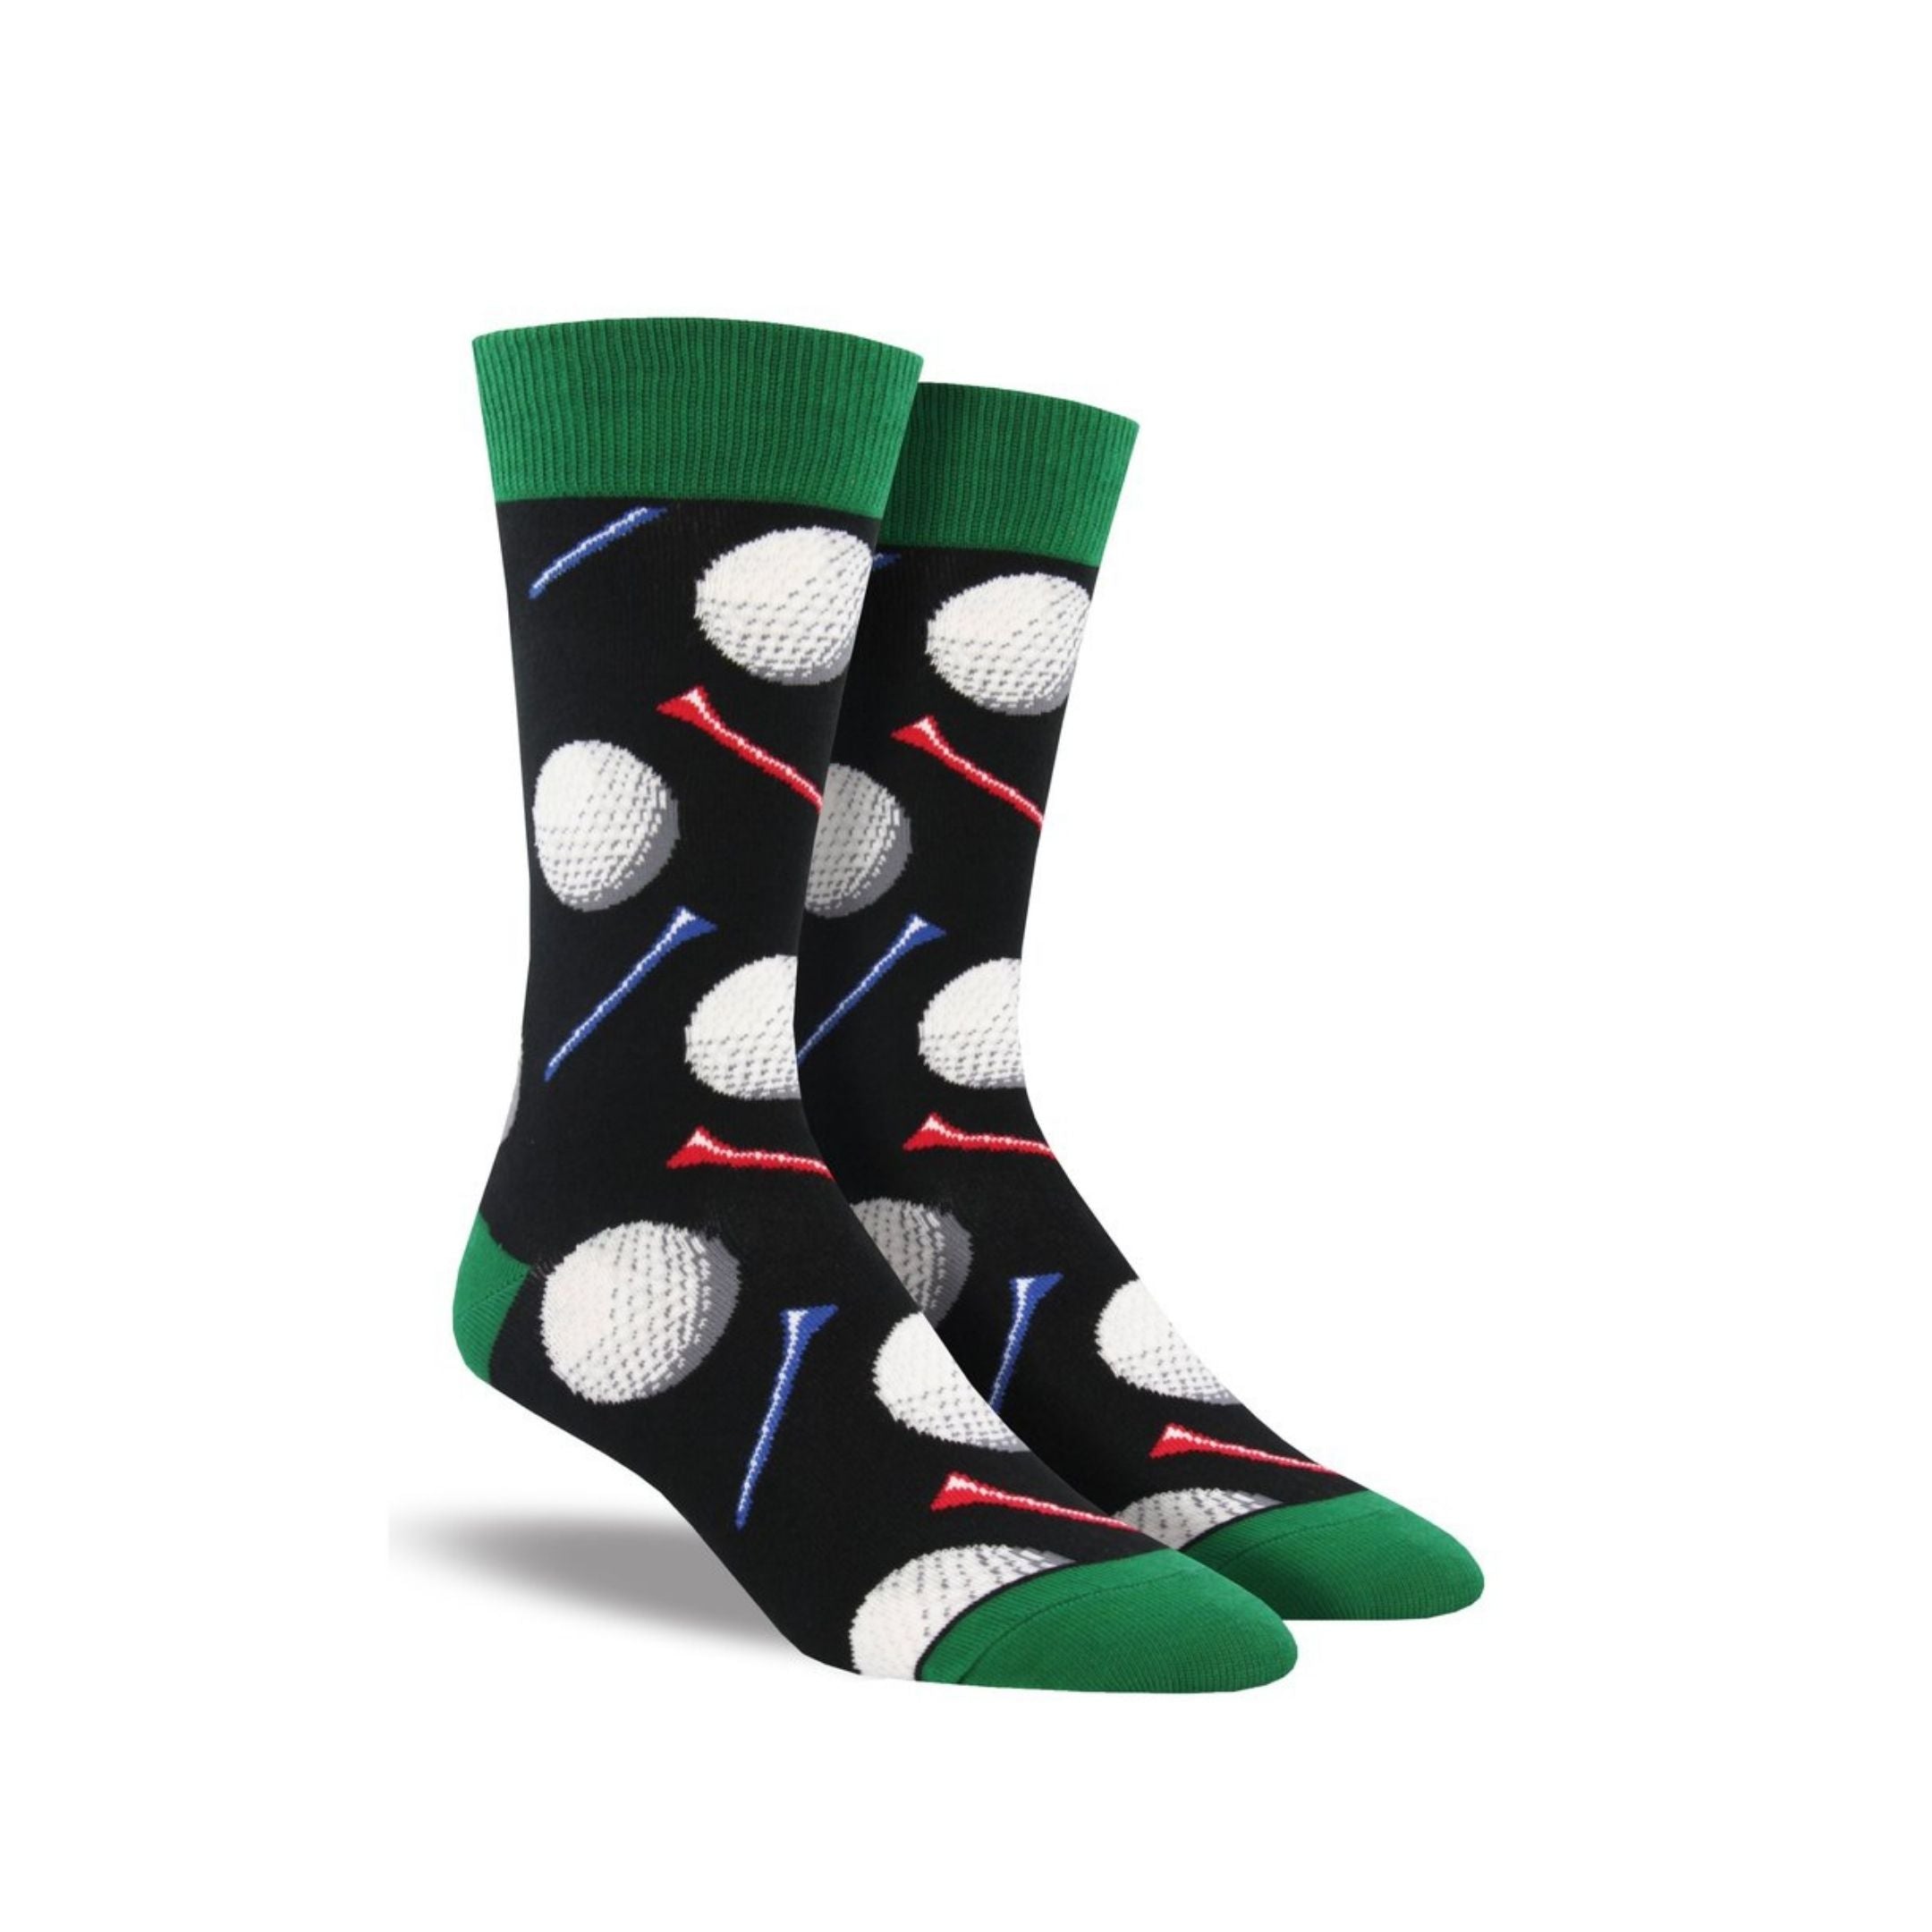 Black socks with green accents with golf balls and tees on them